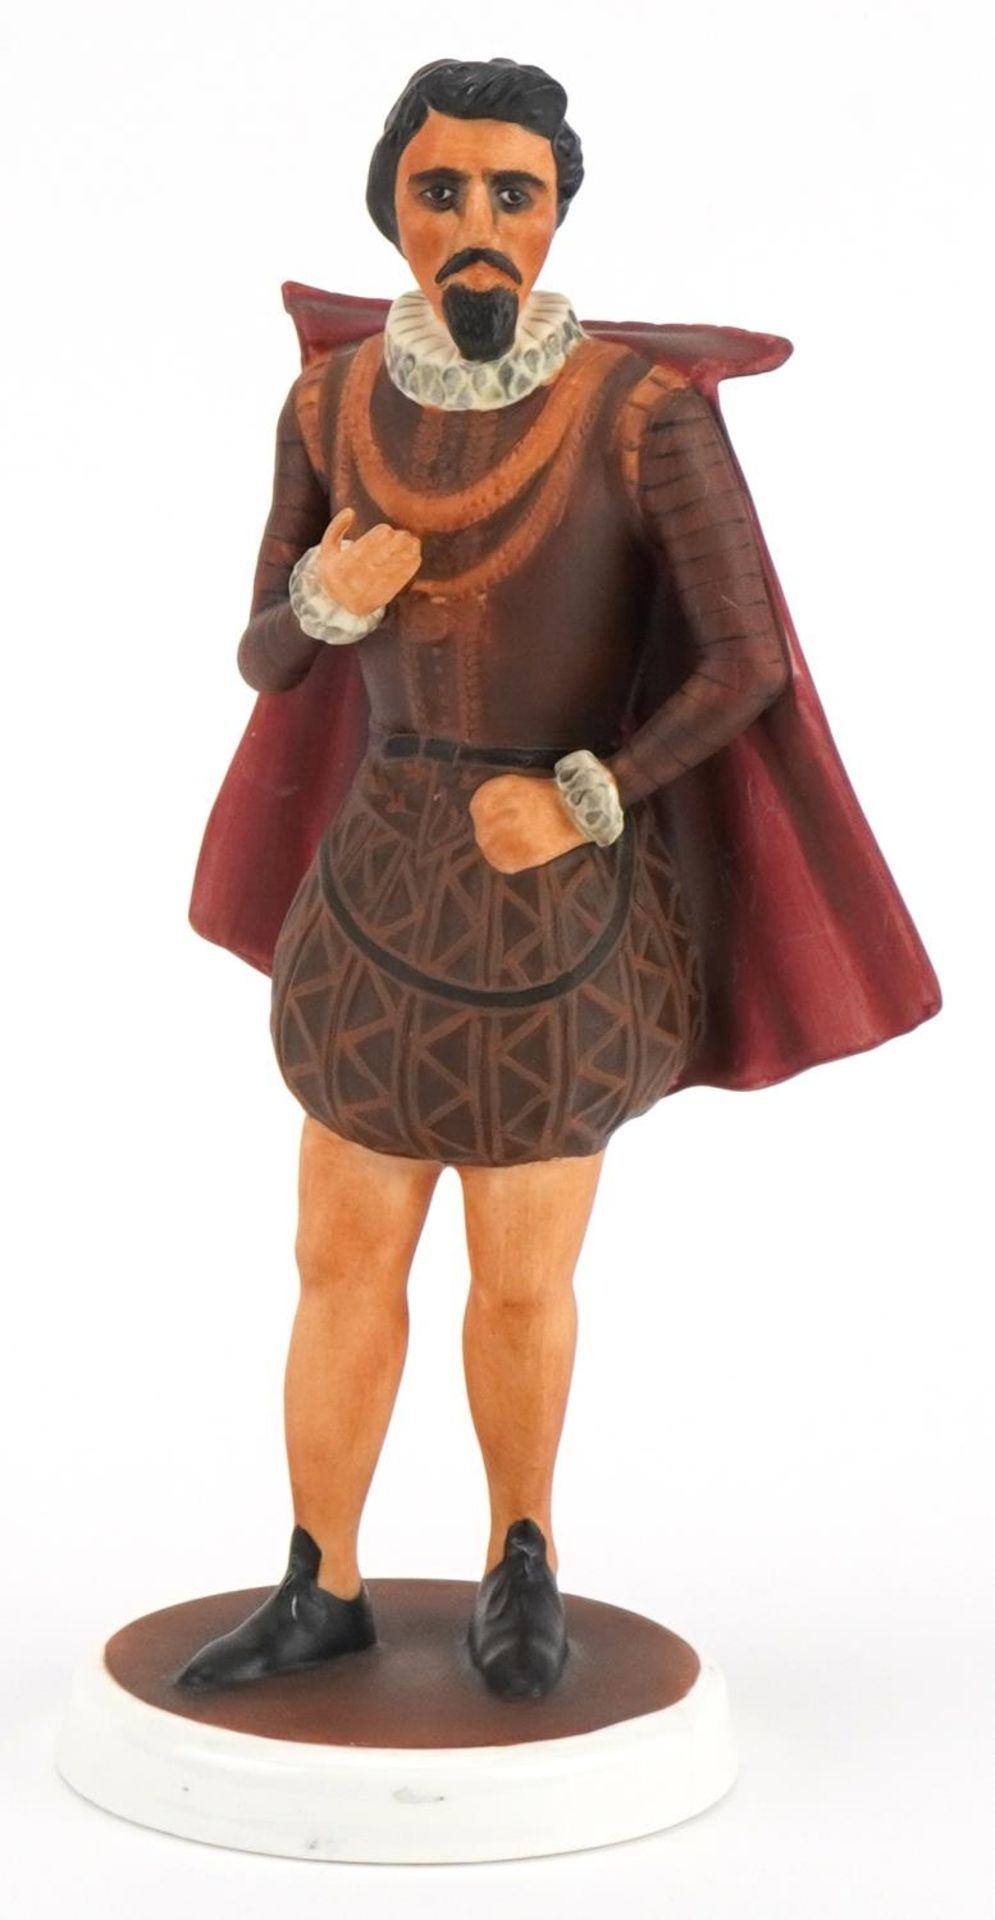 Coalport figure of Sir Walter Raleigh 22.5 high : For further information on this lot please visit